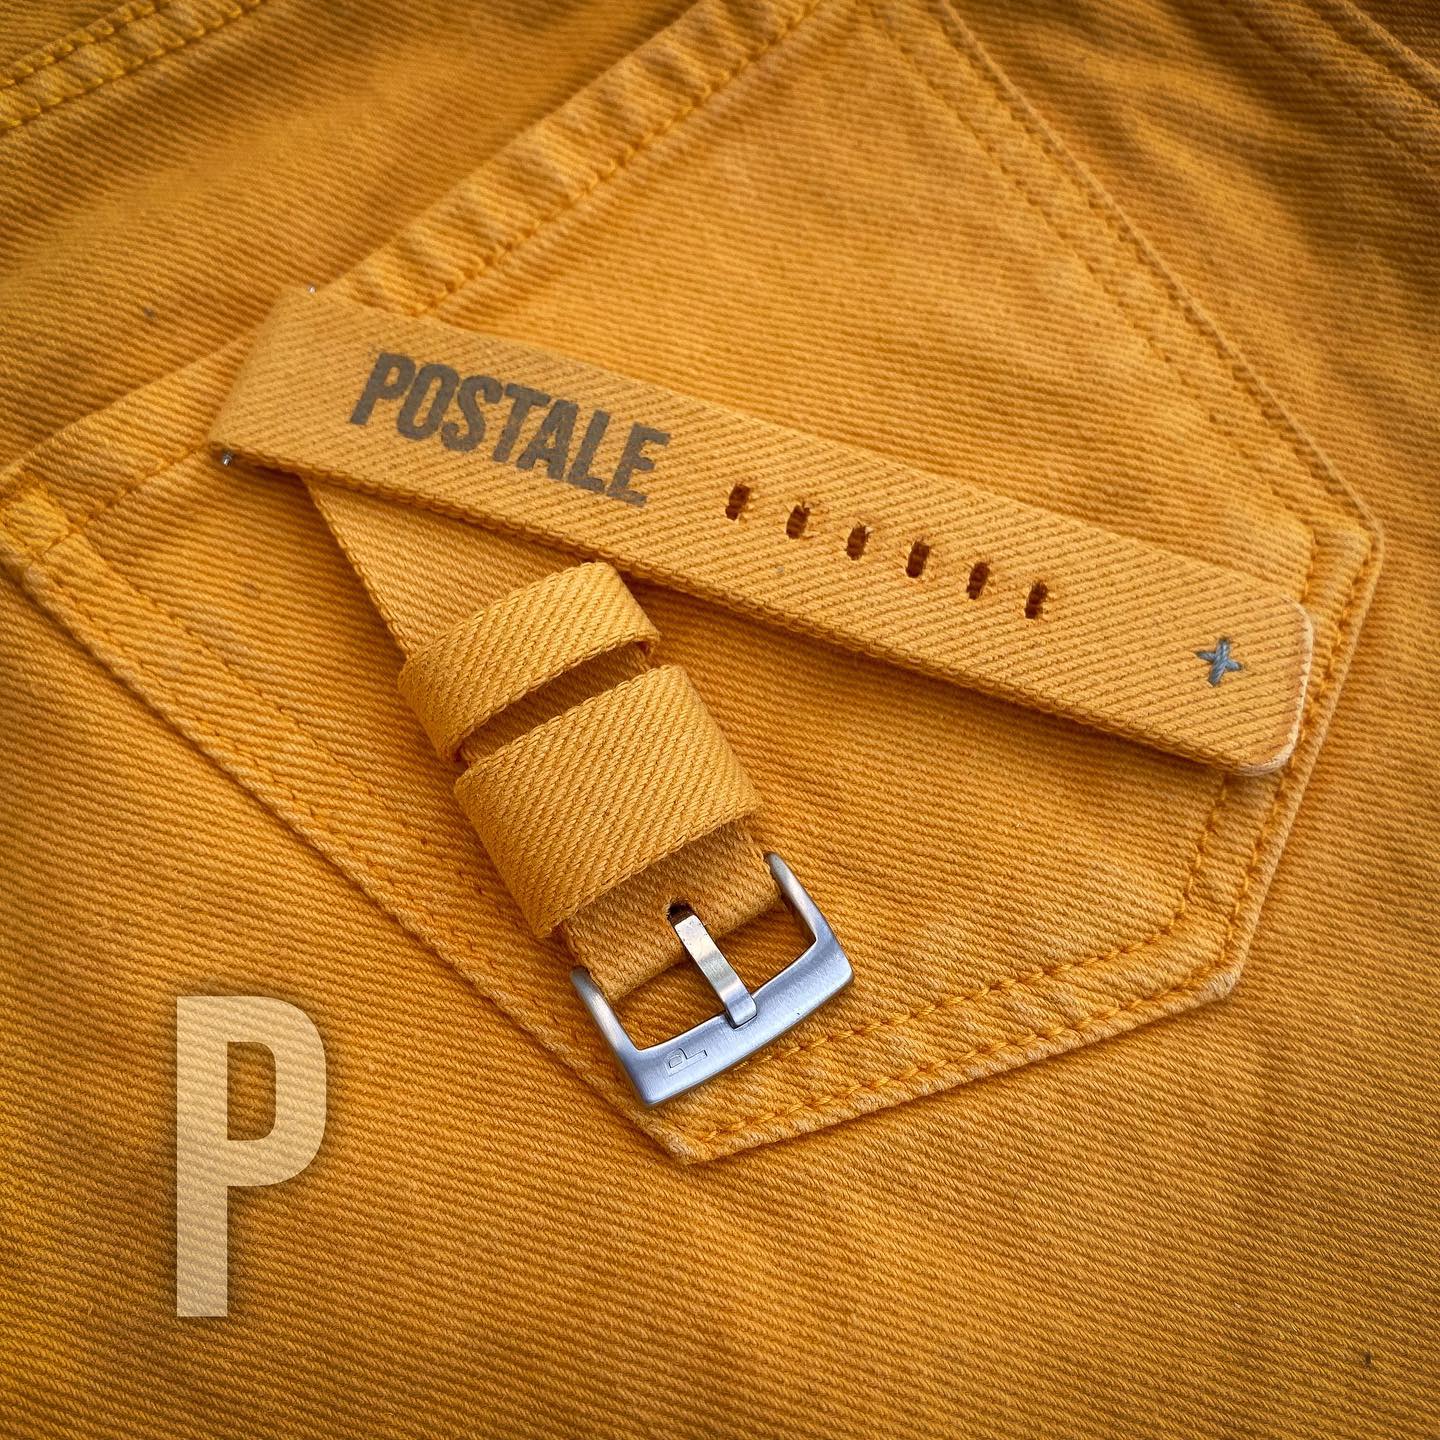 Postale canvas strap in yellow color